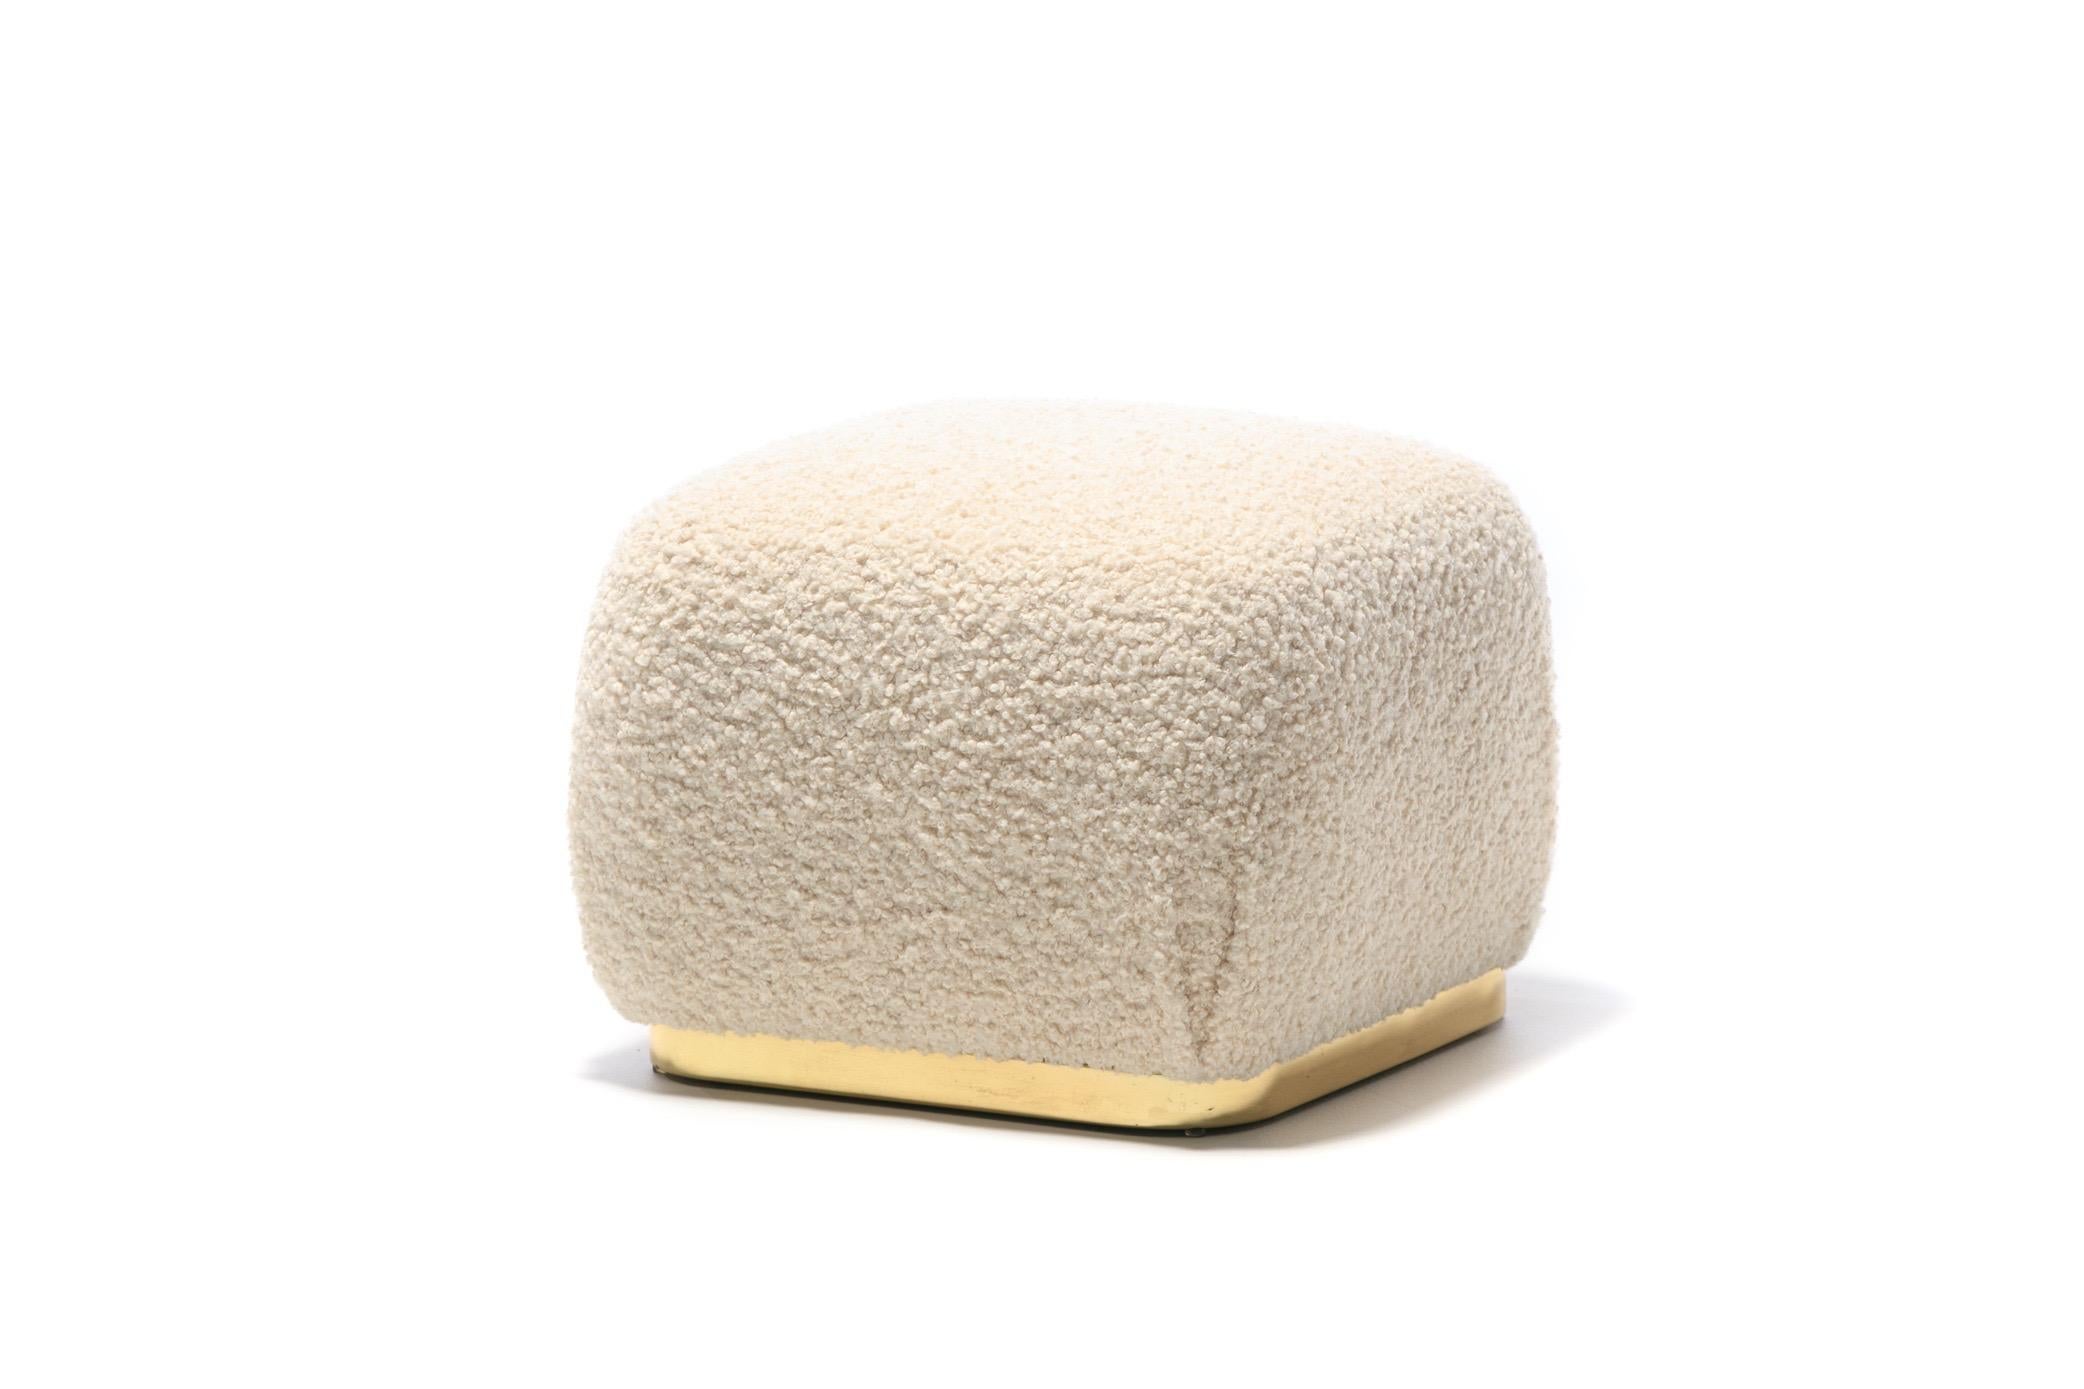 Post modern Karl Springer style Soufflé pouf ottoman aptly named for its similarity in form to a French Soufflé. Brass square base with rounded corners. Professionally reupholstered cushion in softly textured ivory bouclé. An easy addition in a